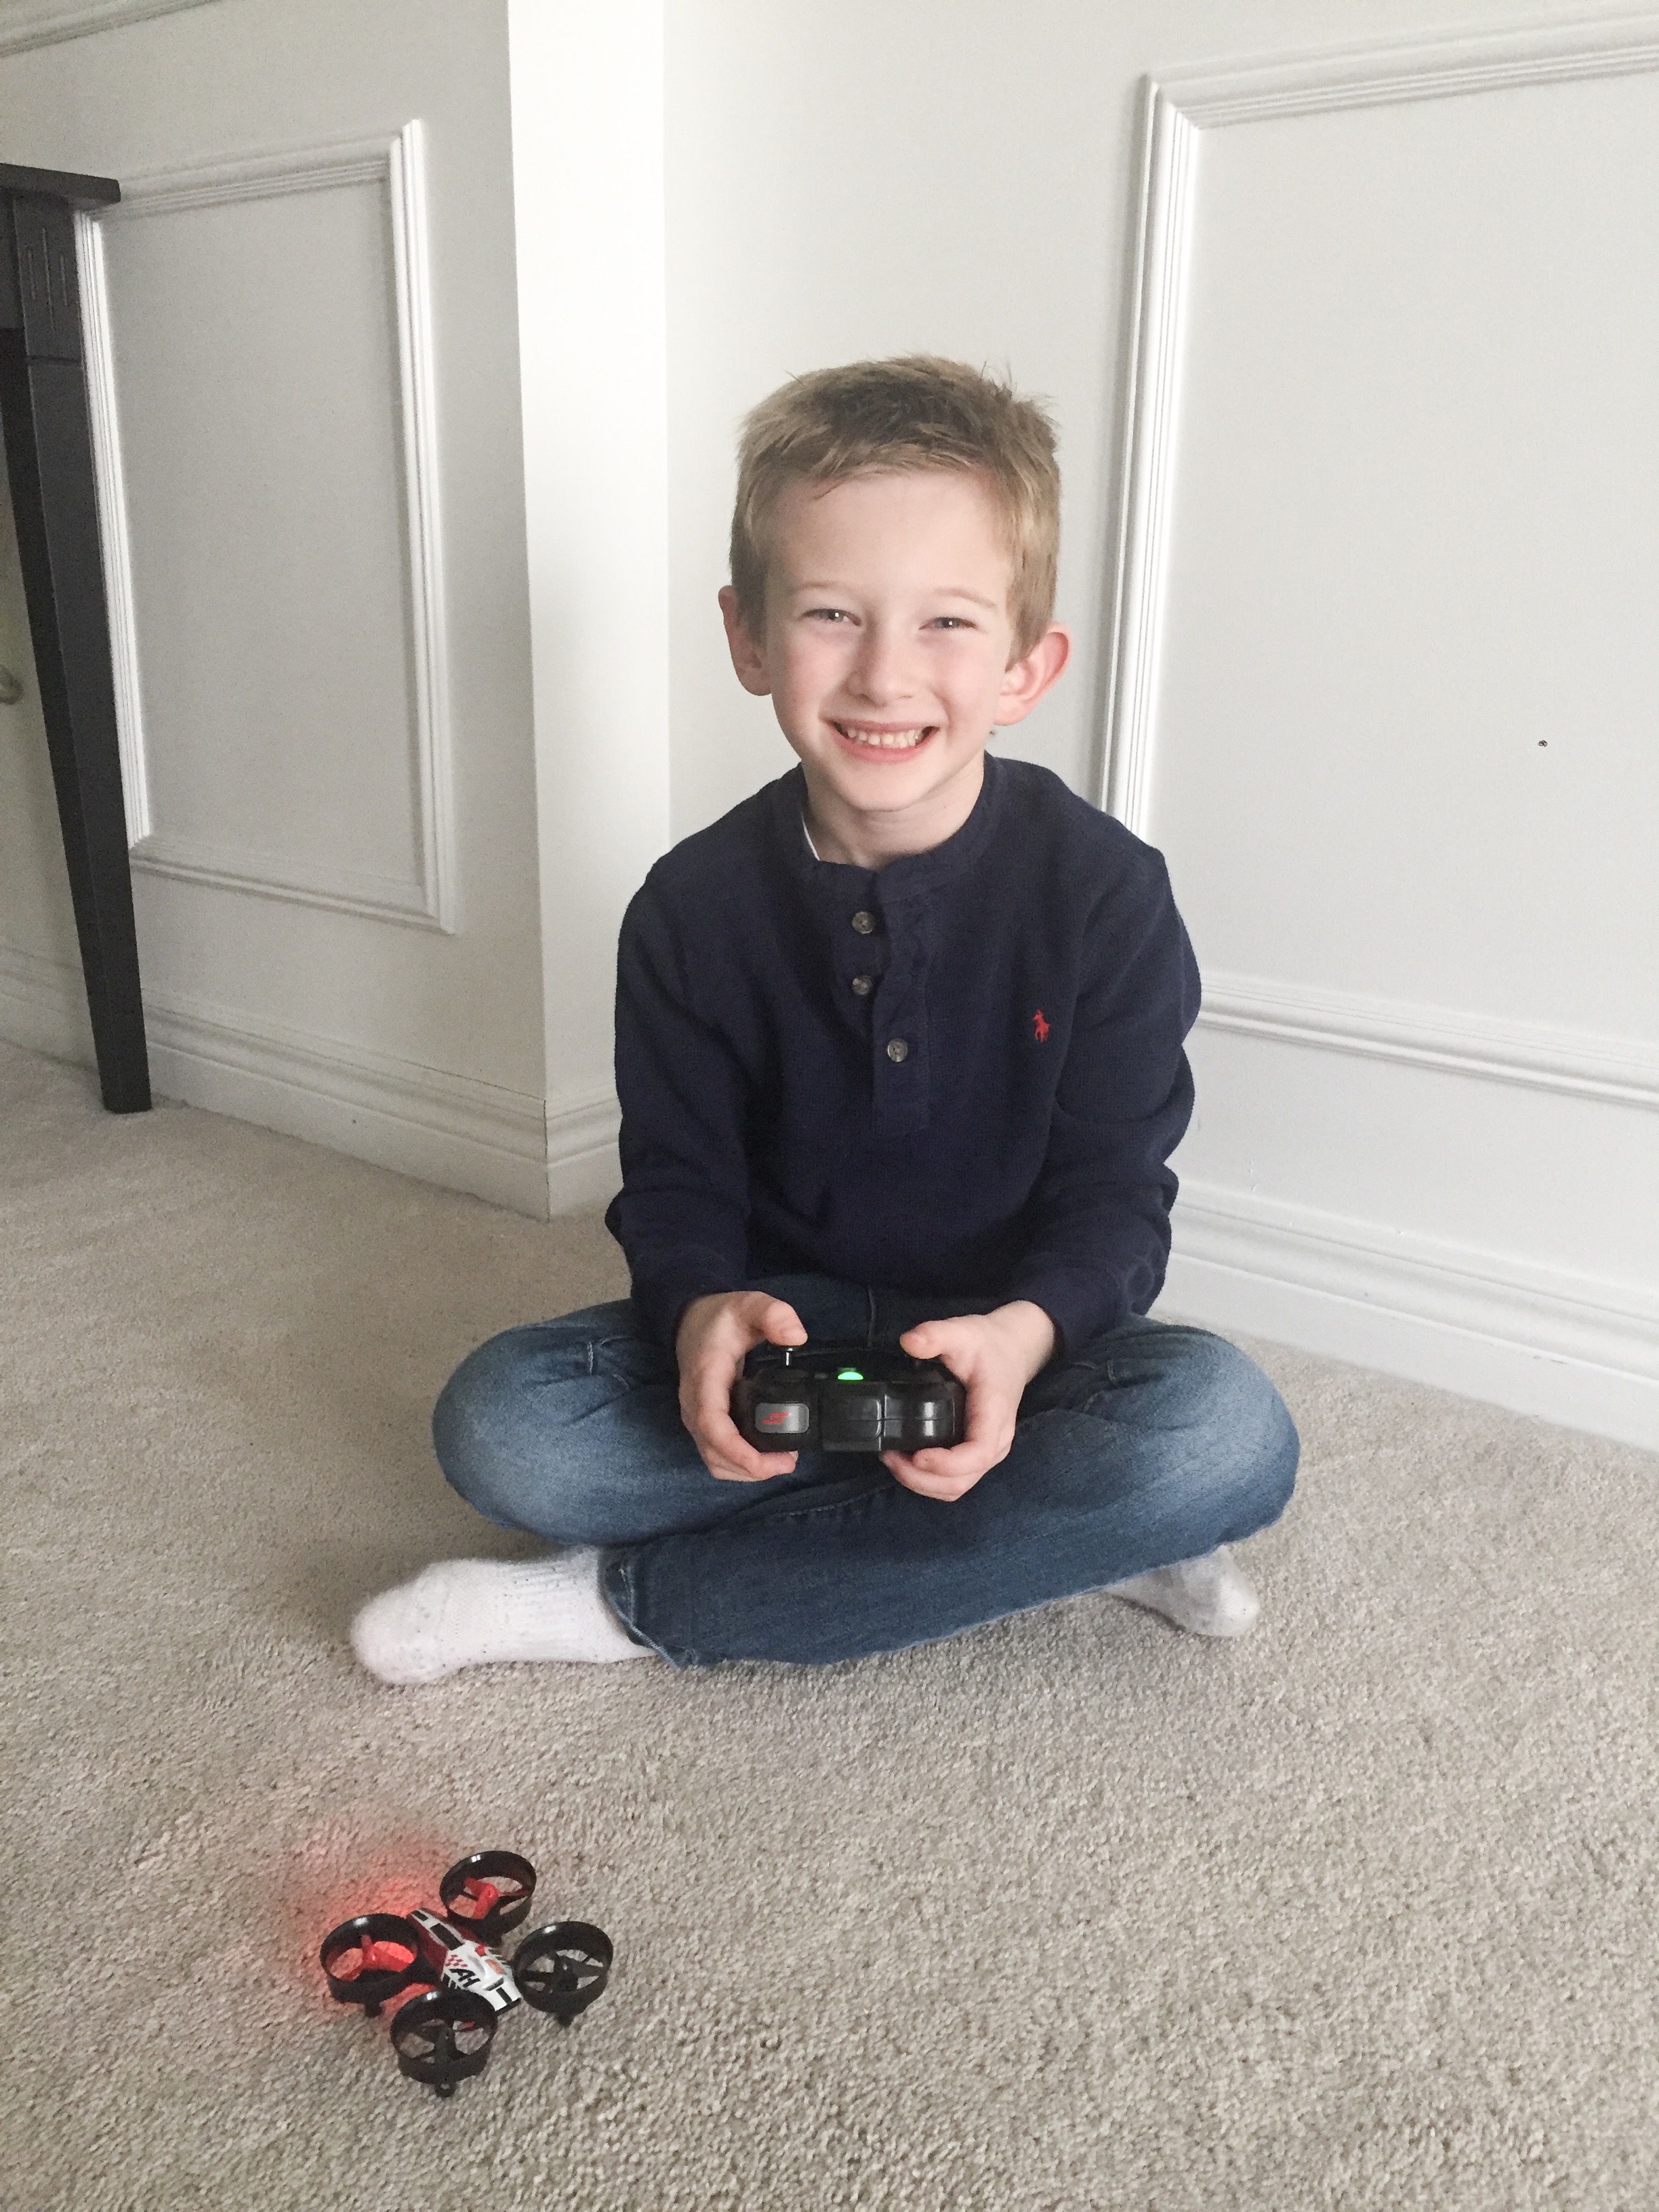 Review on the Air Hogs Micro Race Drone by Spinmaster